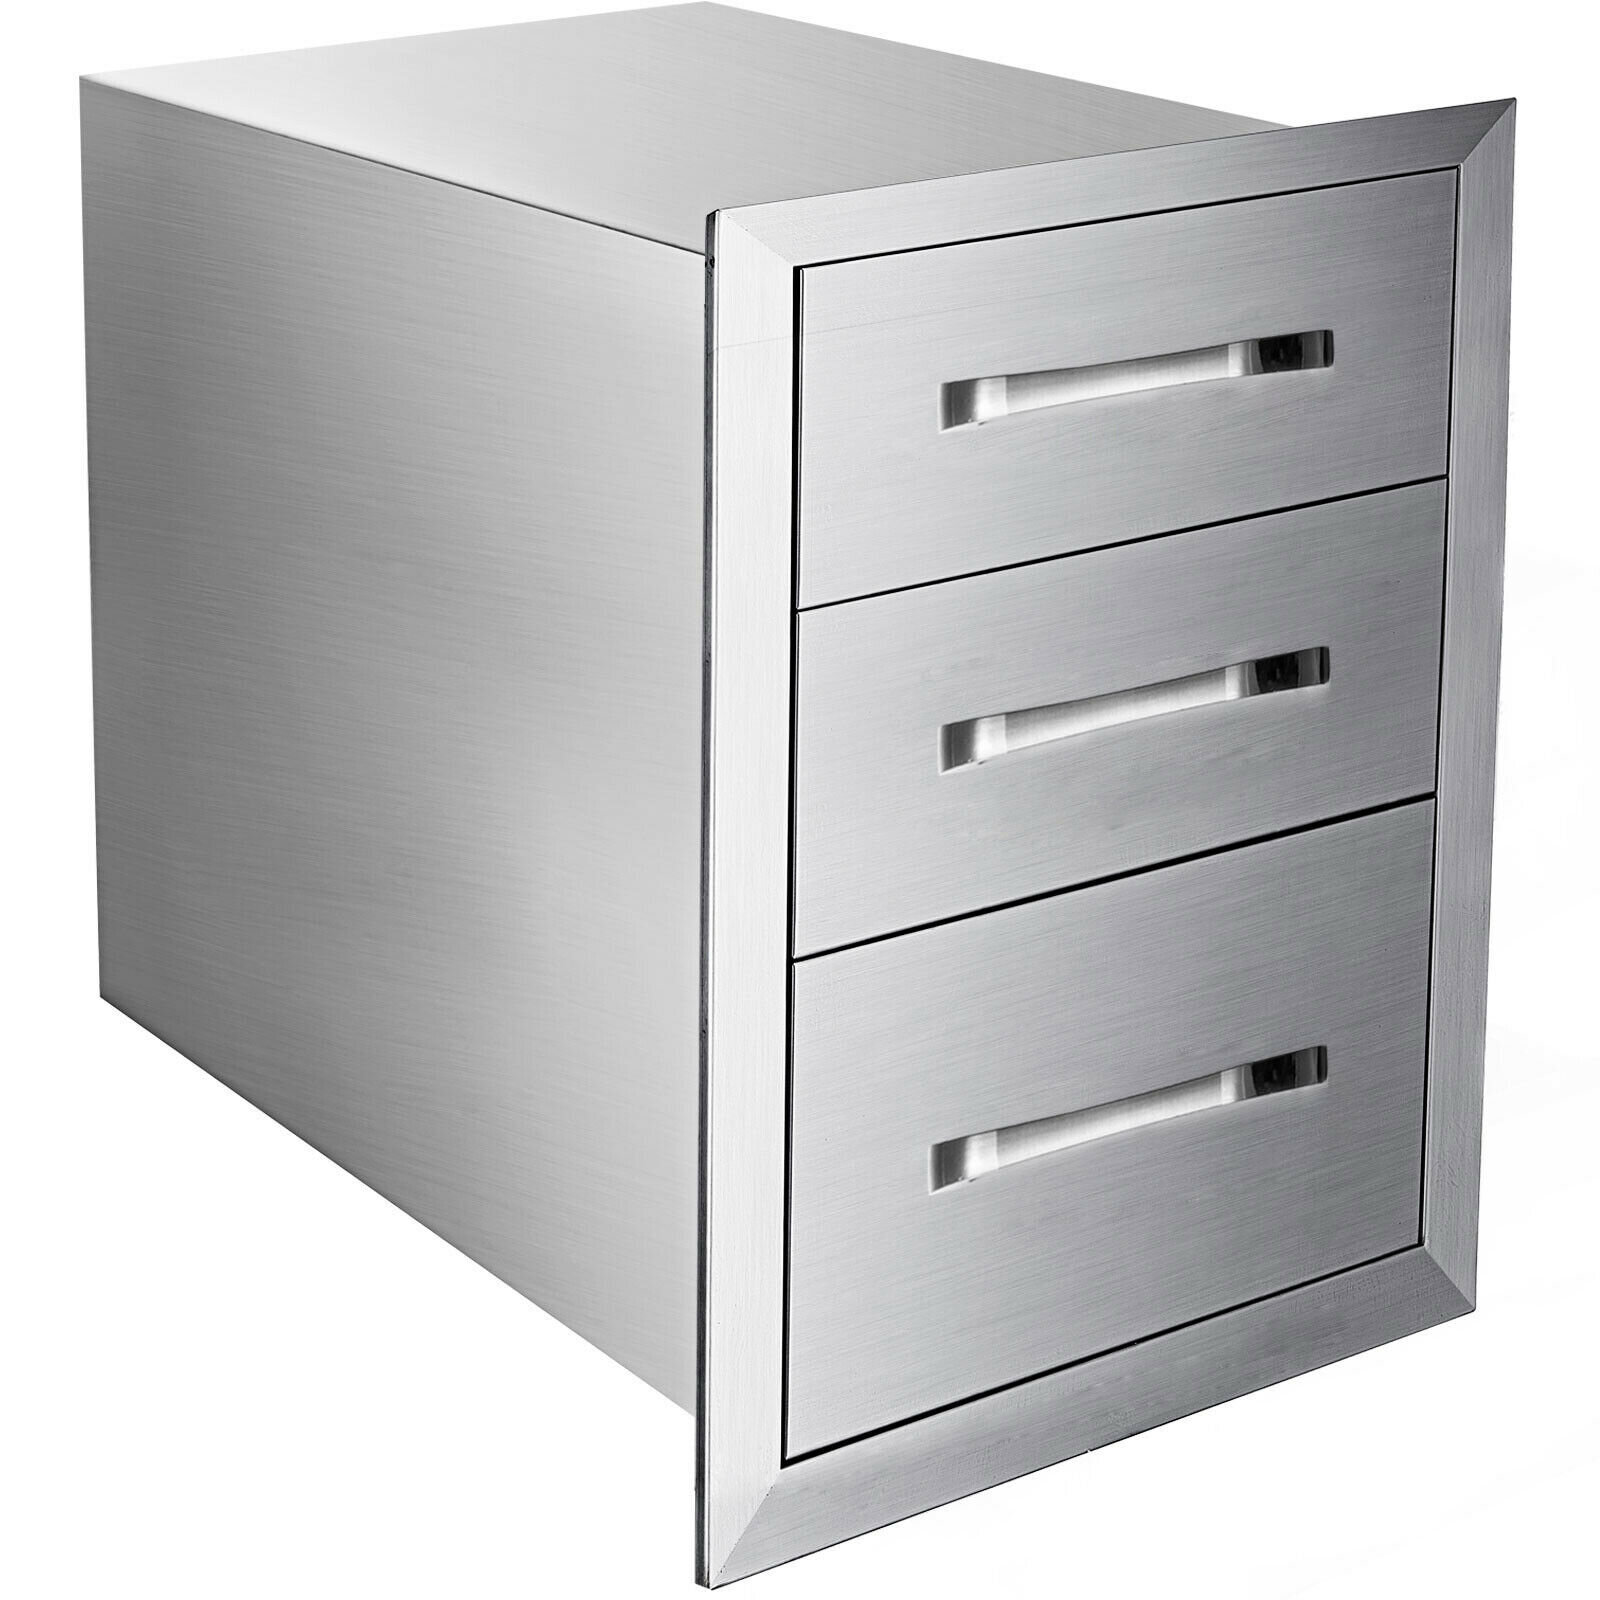 15.7" x 21" Outdoor BBQ Island Drawers Access Double Drawer Stainless Steel 